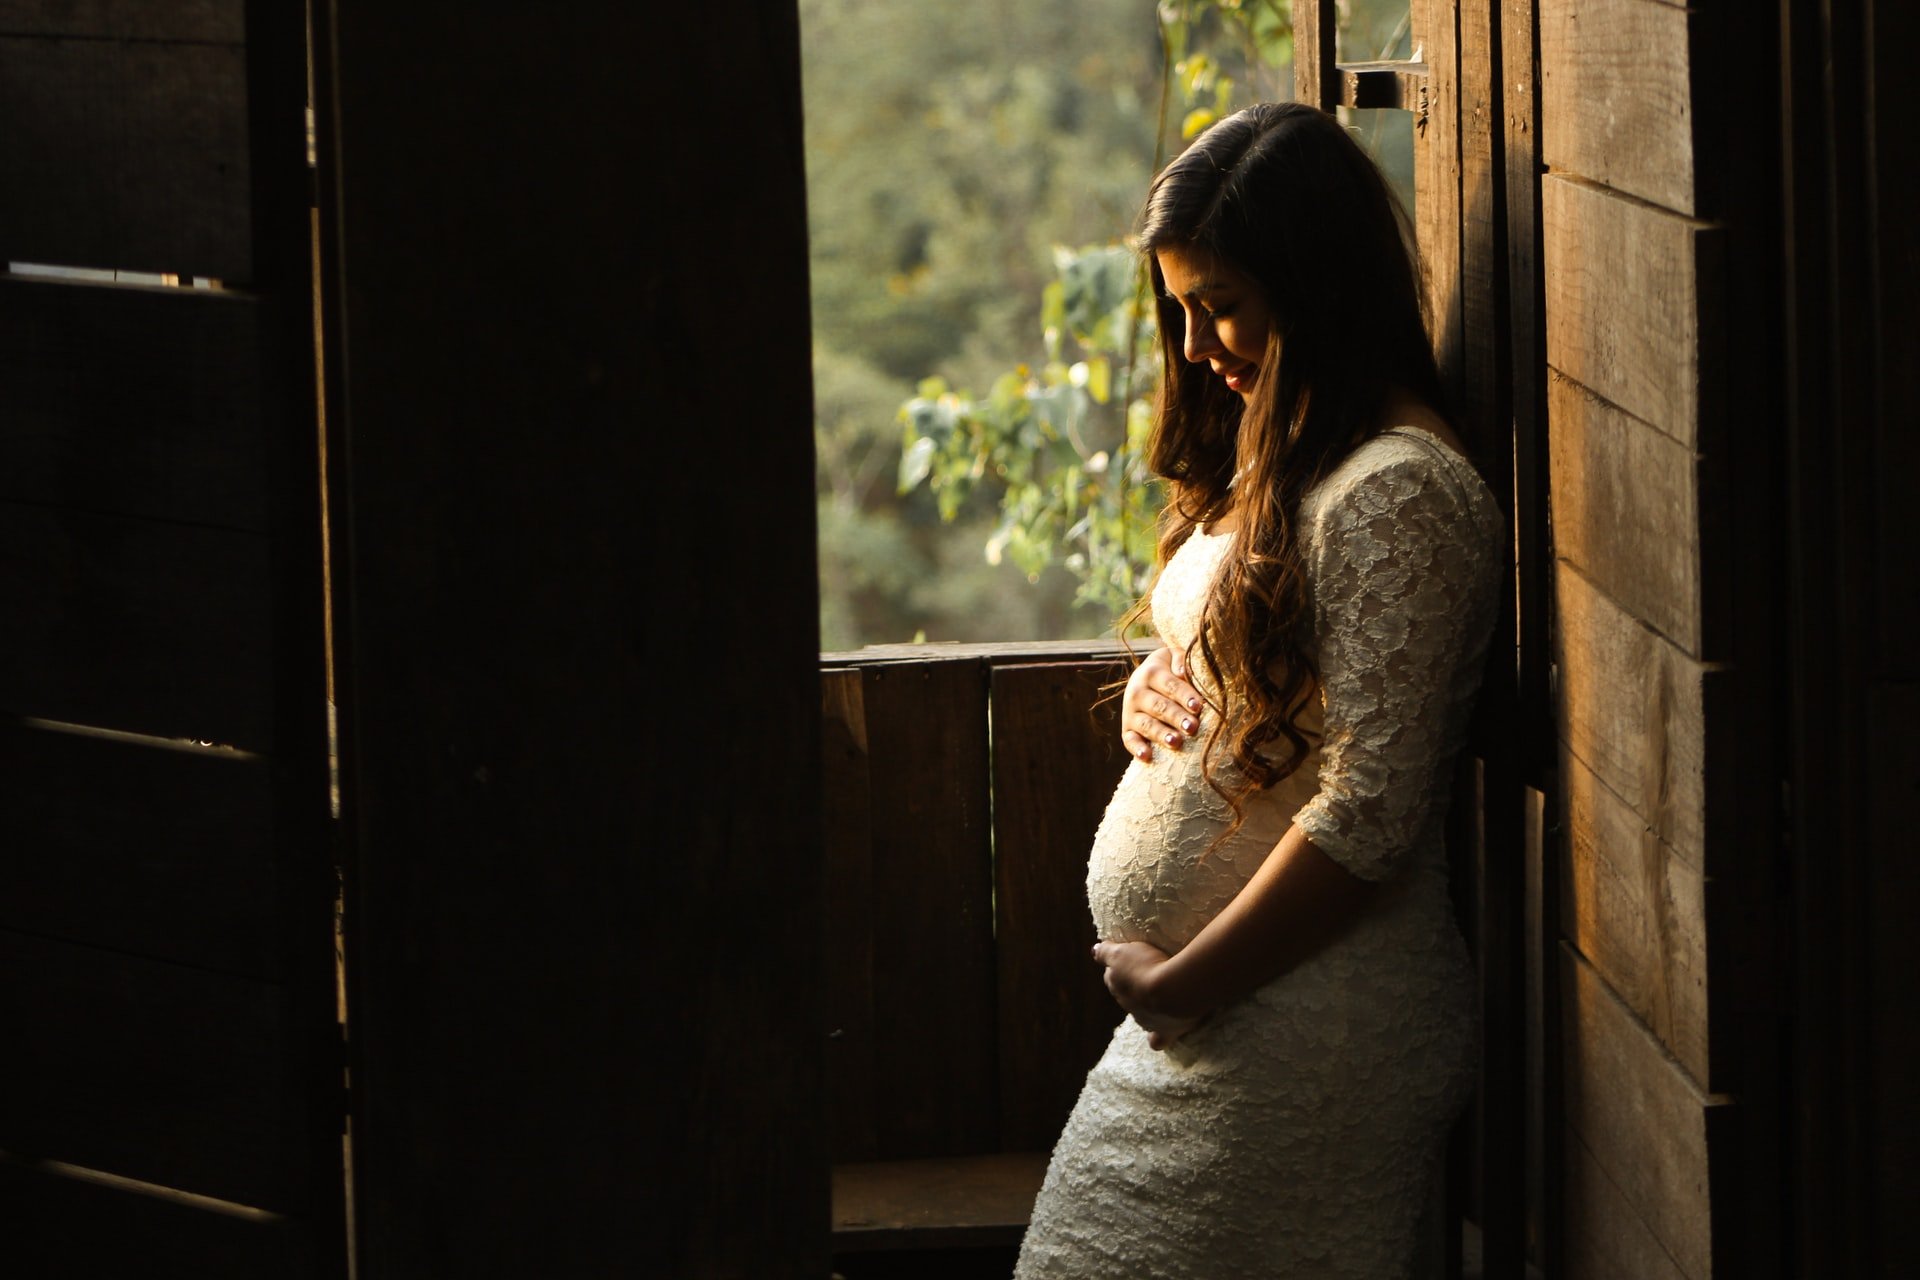 Pregnant woman with hand on belly | Source: Unsplash